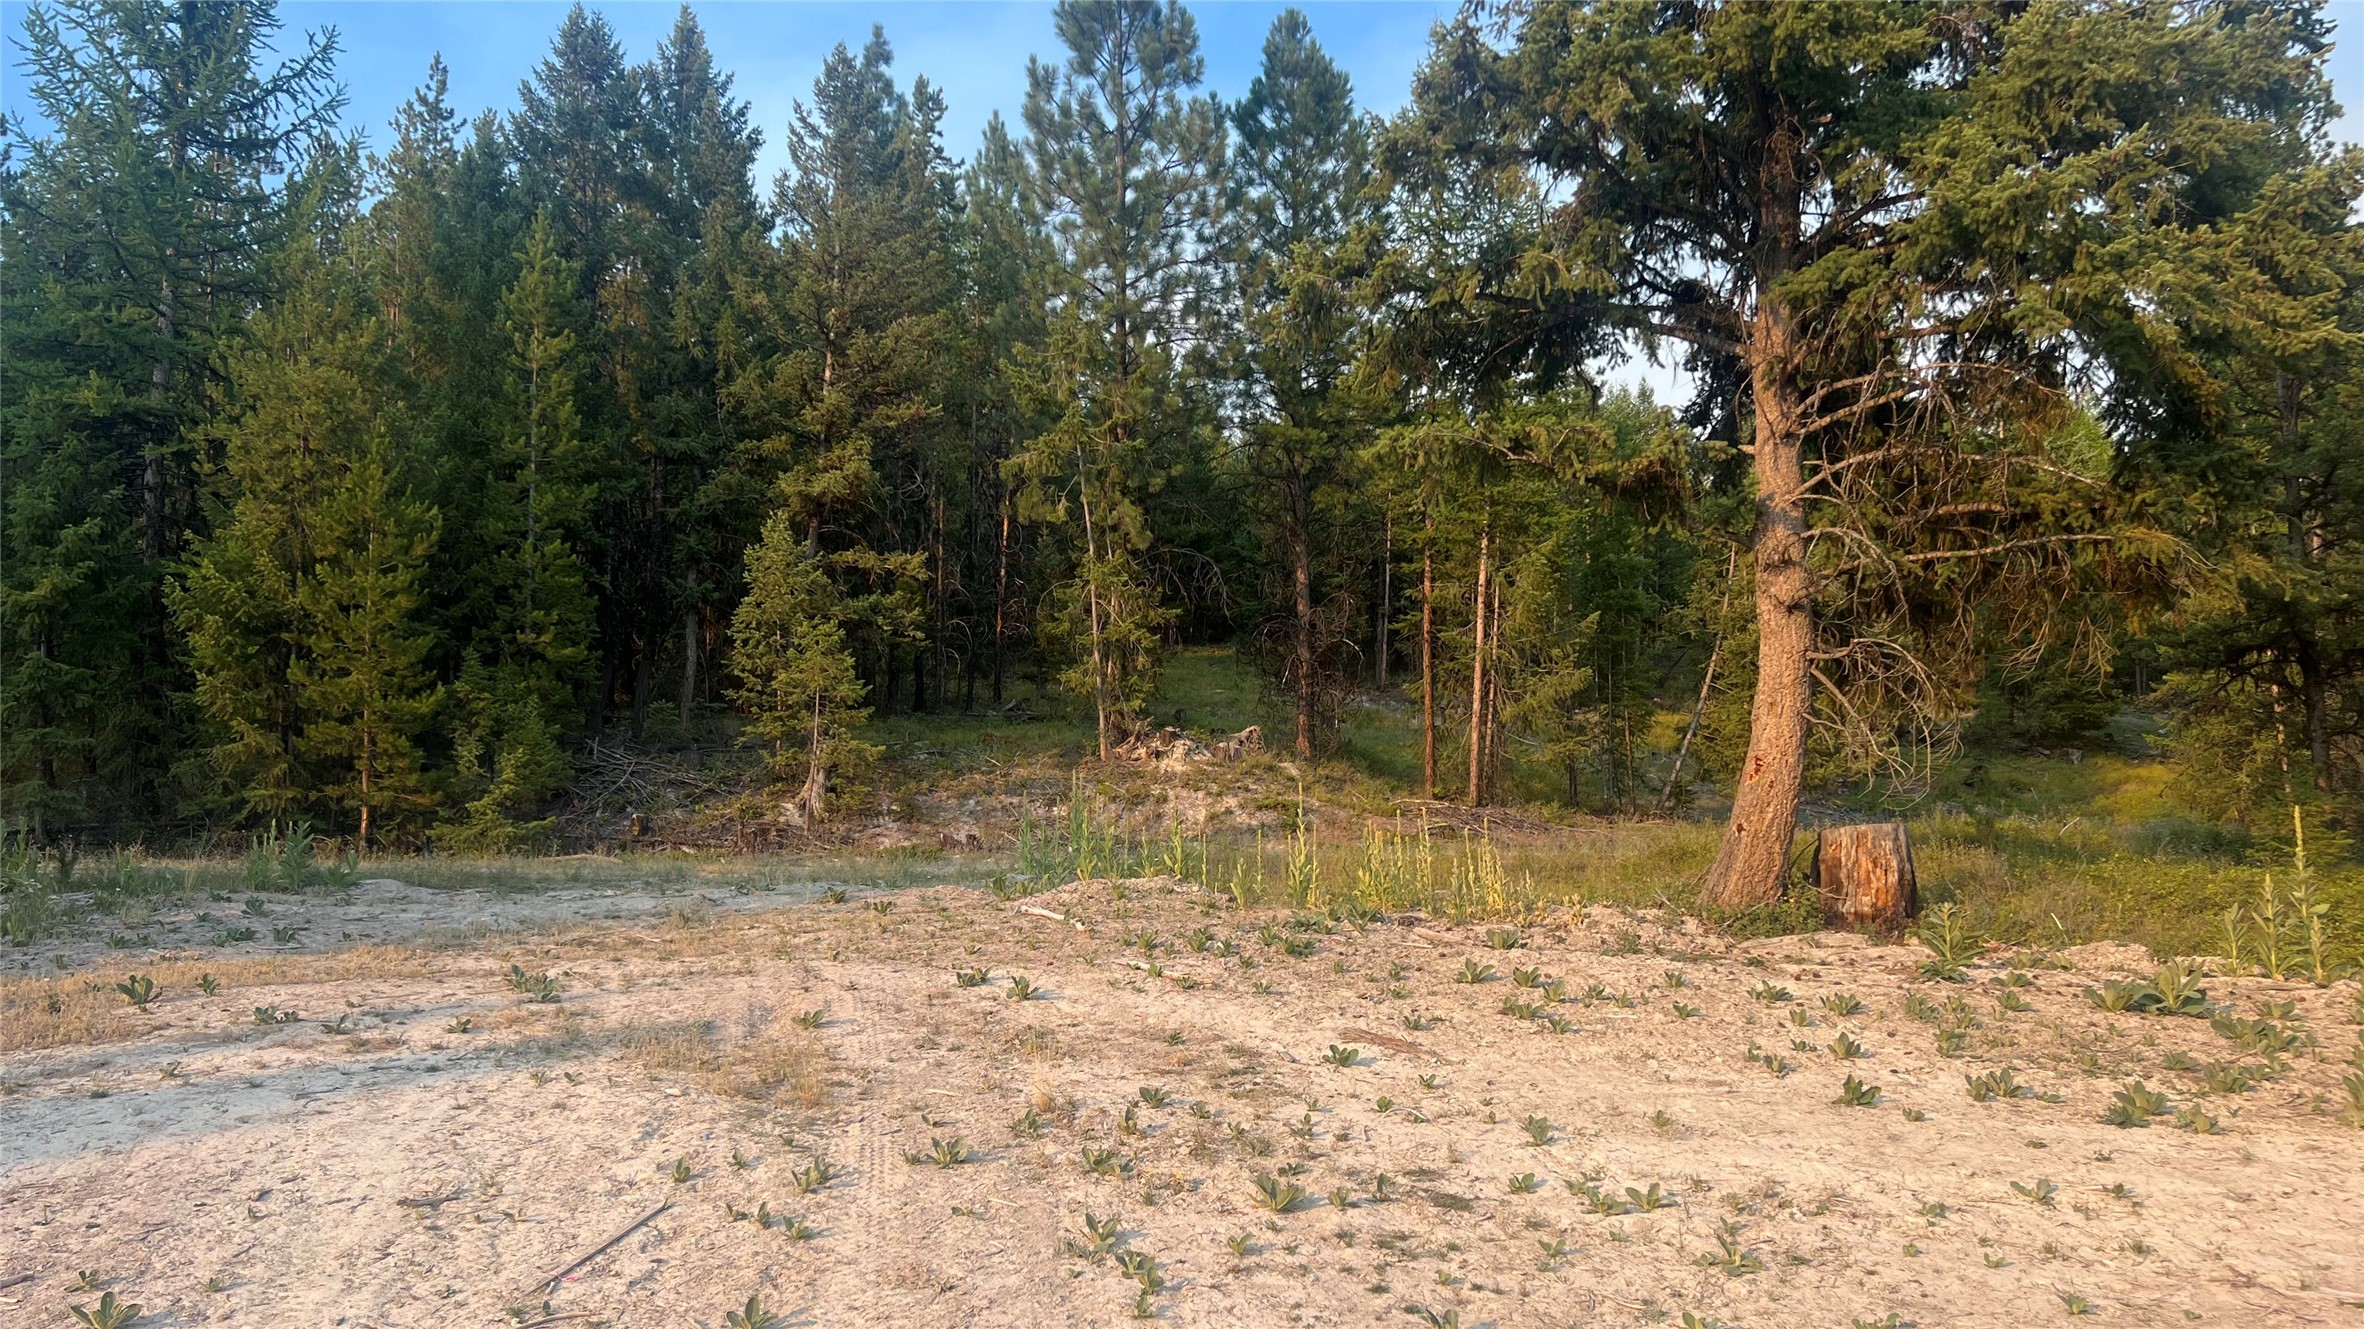 This 20.93 acre lot is located within close proximity to Happy's Inn and halfway between Libby and Kalispell MT. Whether your building your dream home or starting a small homestead this property will meet your needs and has endless potential. Within a short proximity are the Thompson Chain of lakes, lakes, streams and rivers. The year long recreational opportunities in the area are countless. Phone and power are installed. Take a drive and visit your future homesite. Call Roby Bowe at 406-293-1988 or your Real Estate Professional.